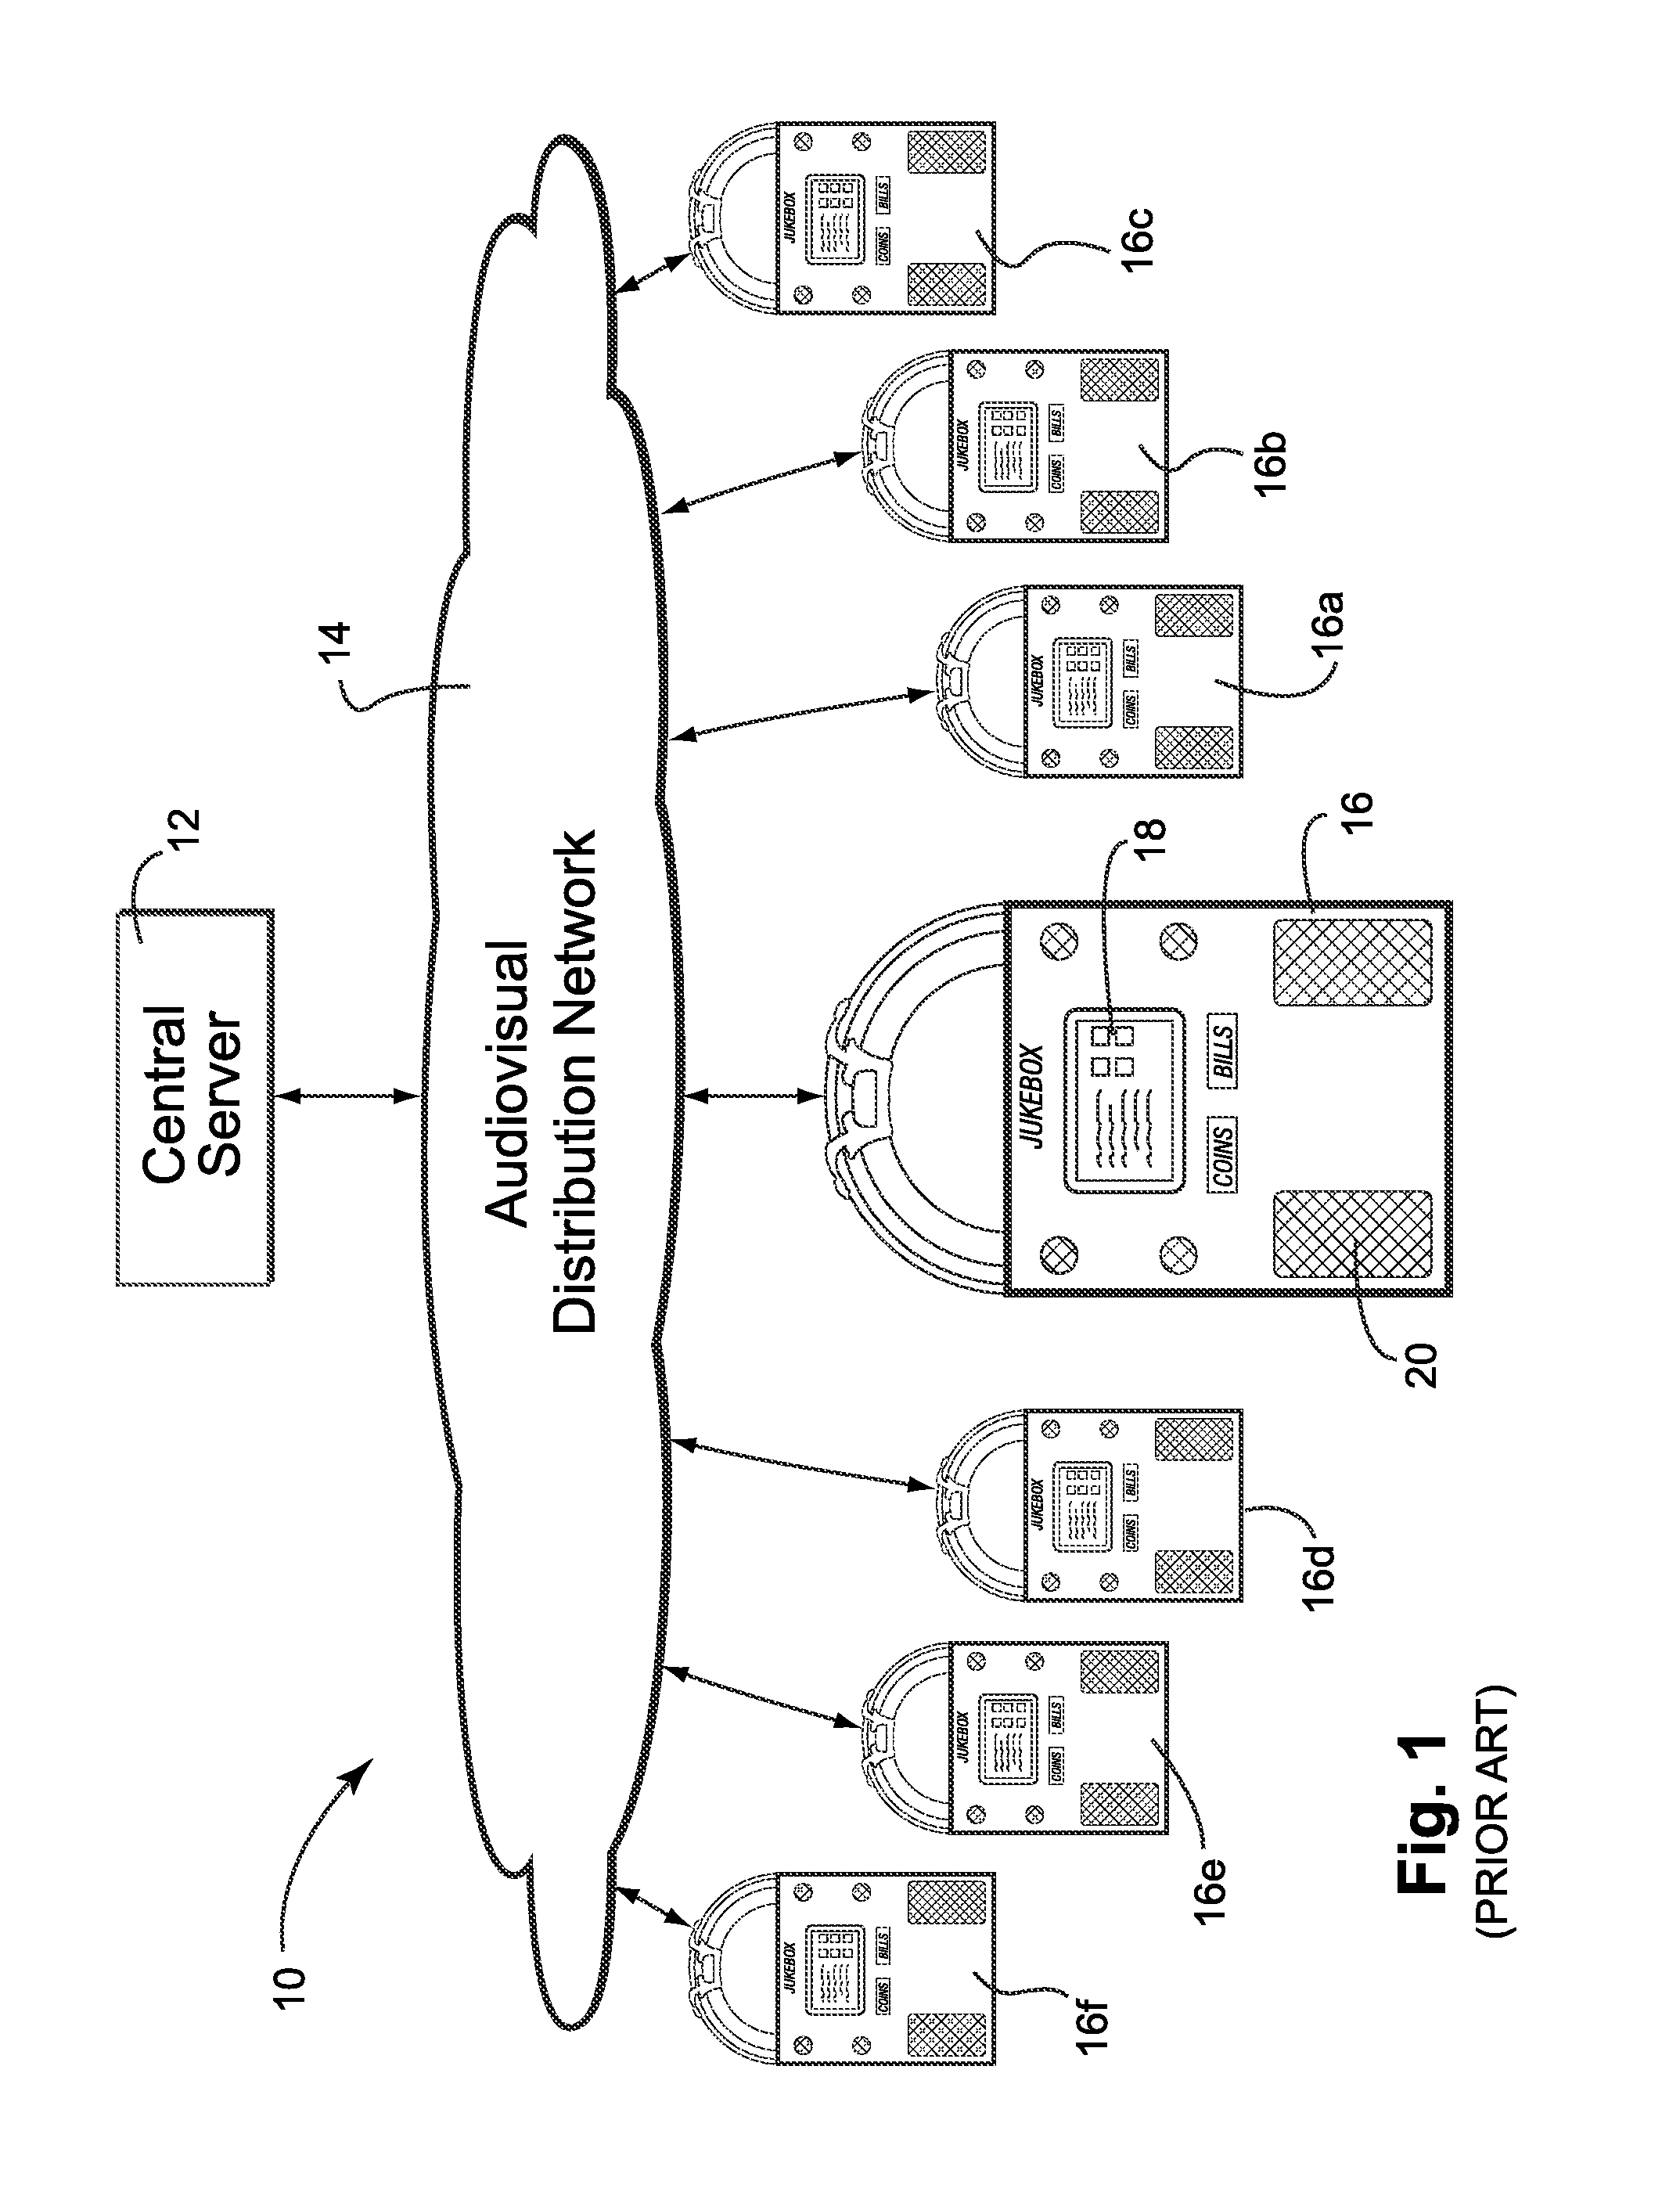 Digital jukebox device with karaoke and/or photo booth features, and associated methods